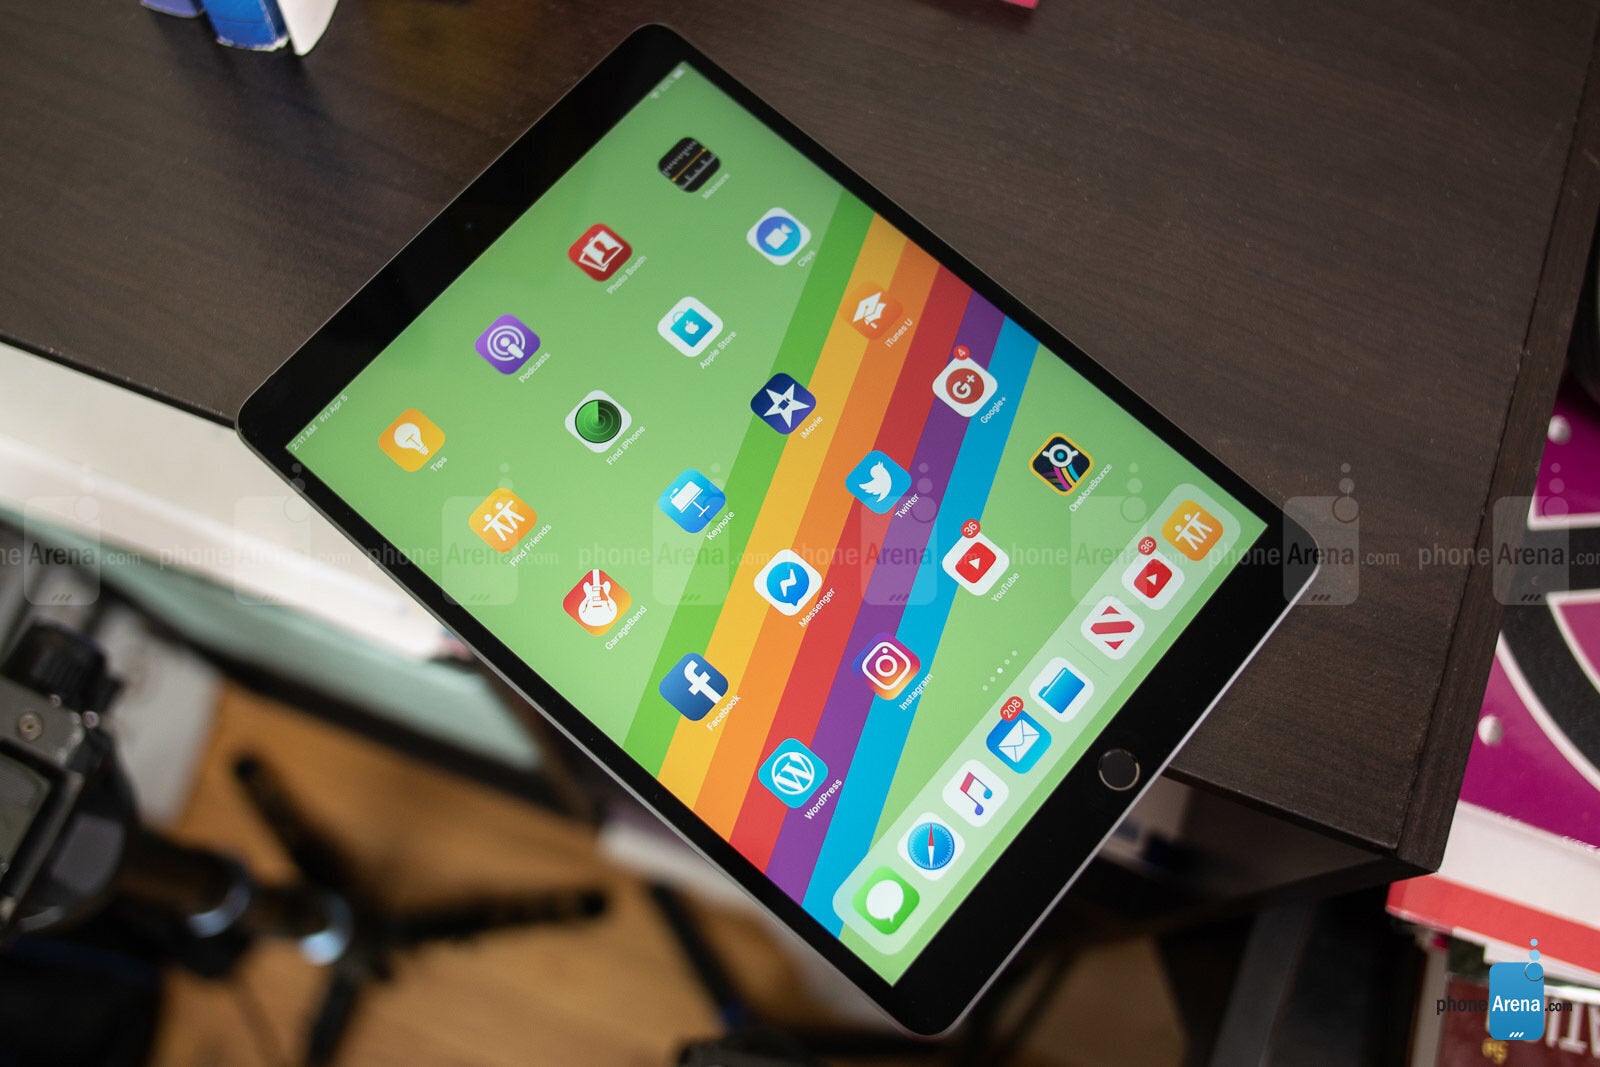 iPad Air (2019) - Is Apple's iPad lineup getting too confusing for its own good?